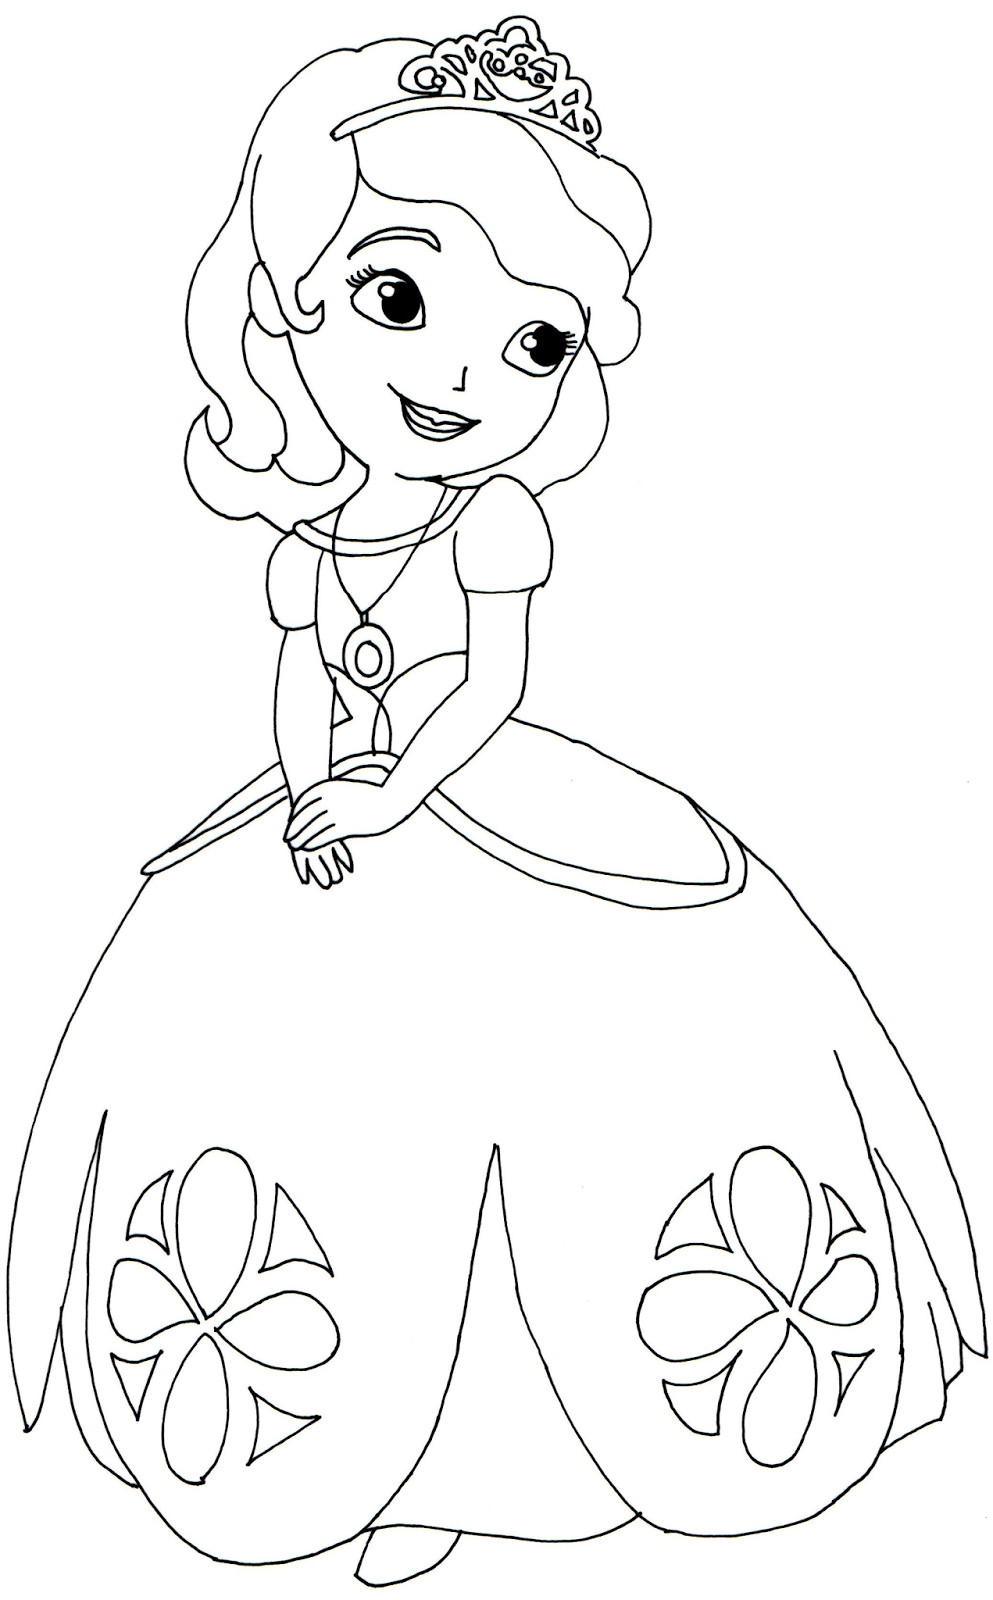 Sofia The First Printable Coloring Pages
 Sofia The First Coloring Pages March 2014